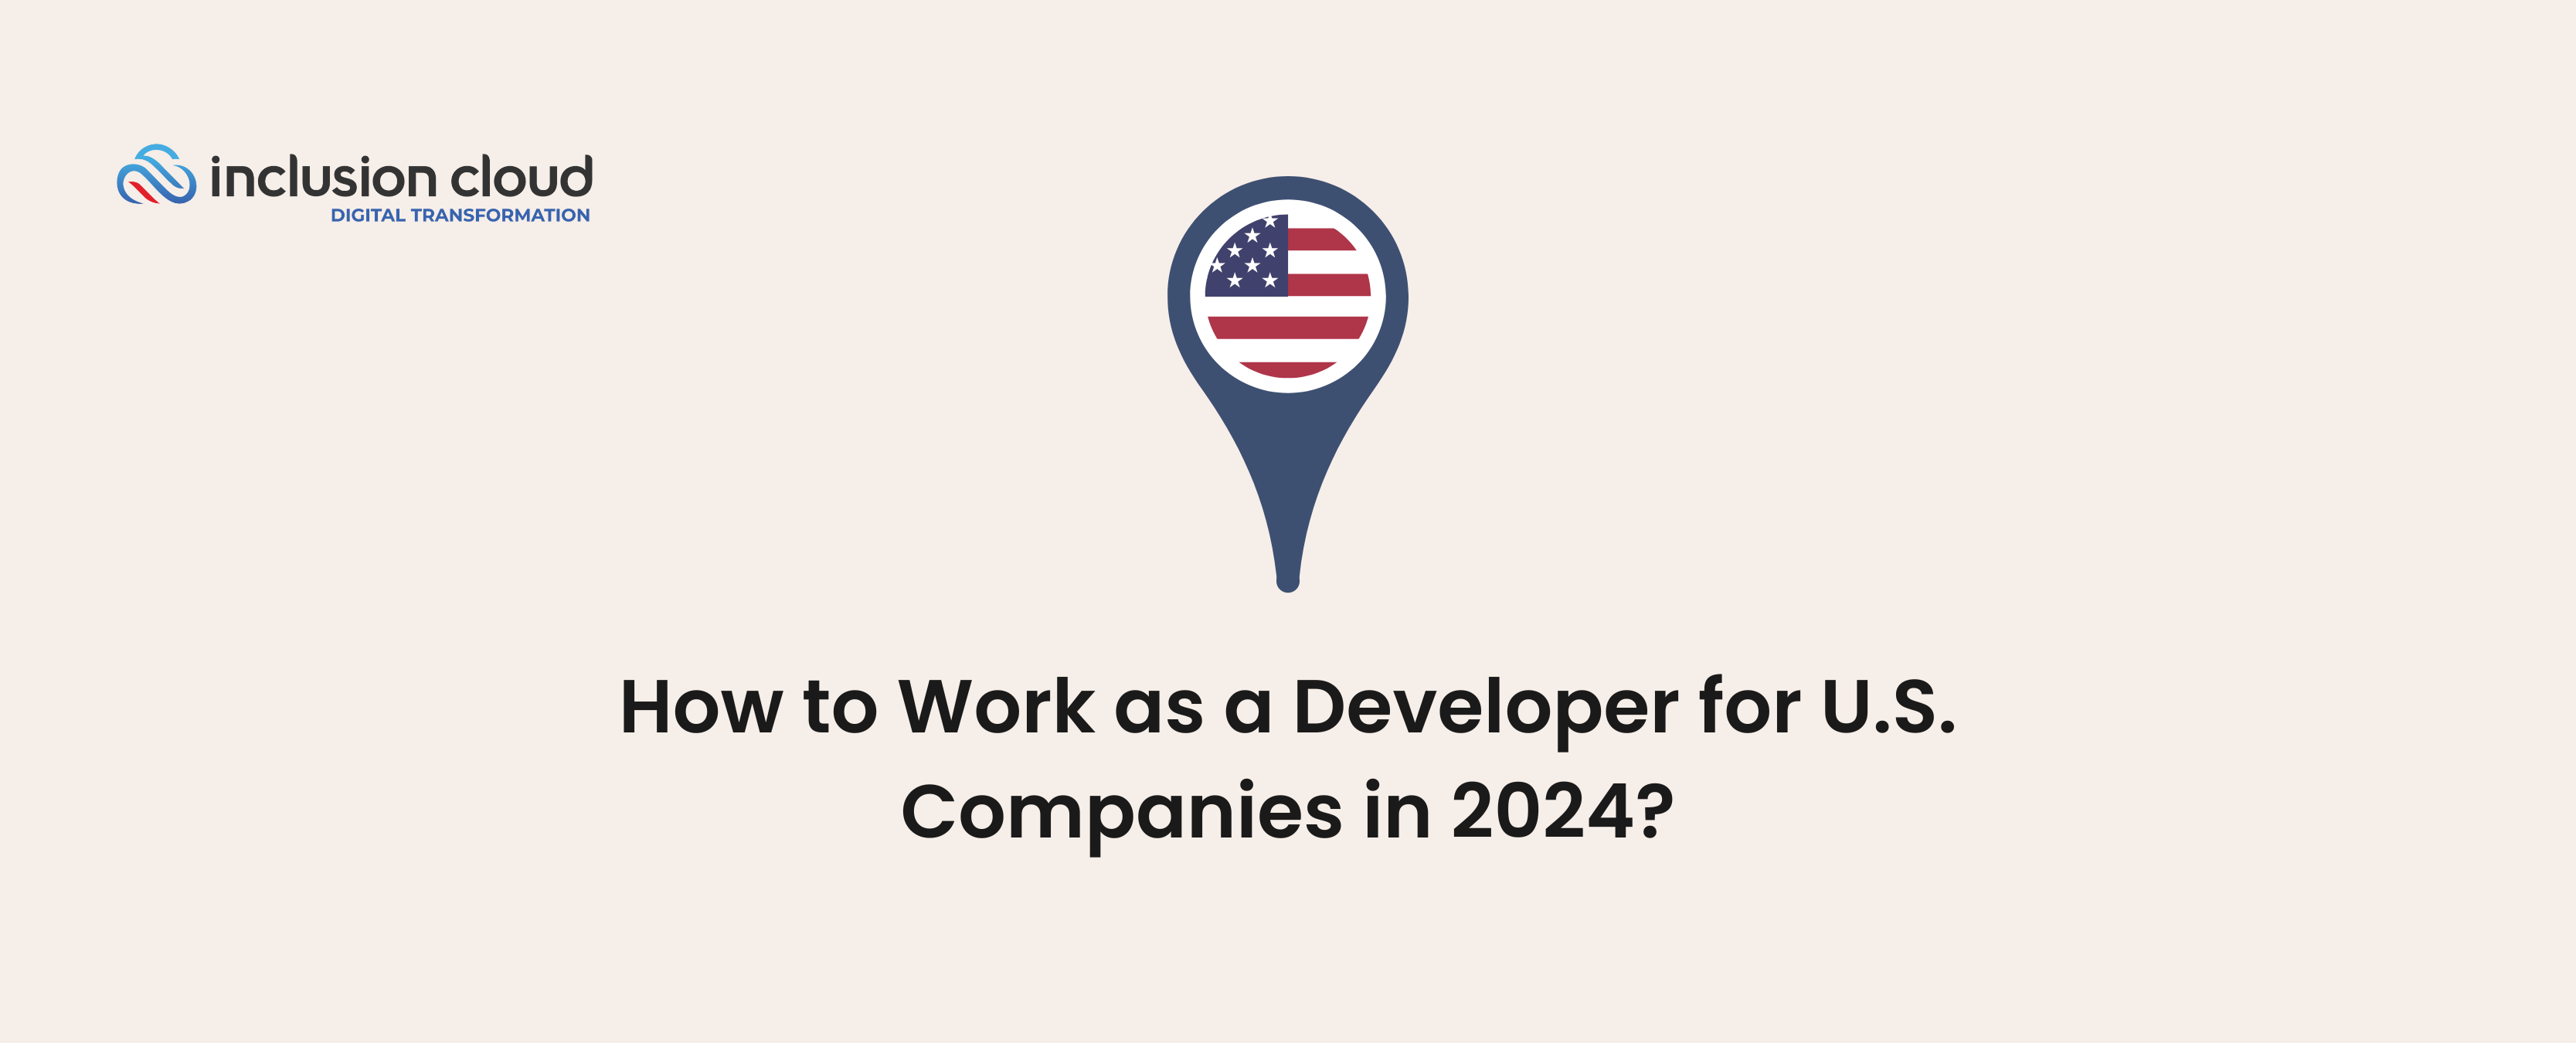 How to Work as a Developer for U.S. Companies in 2024